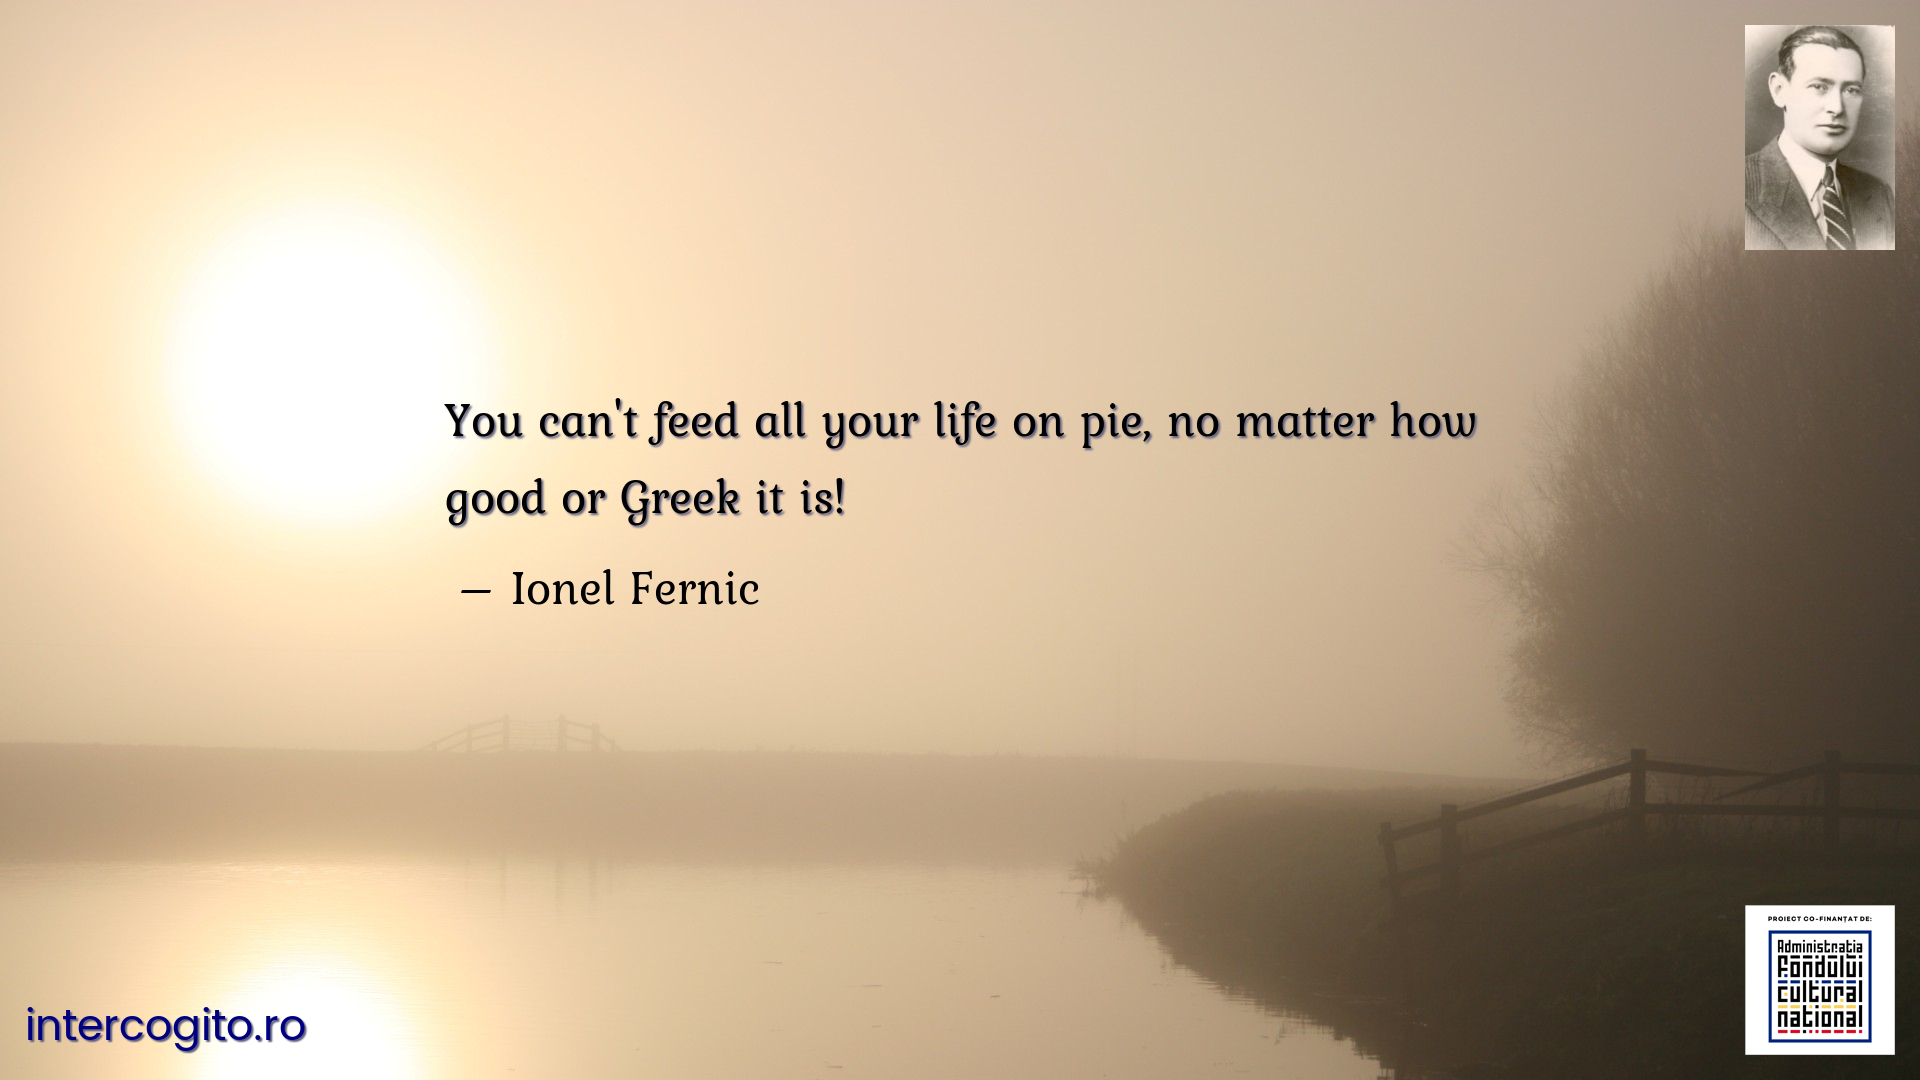 You can't feed all your life on pie, no matter how good or Greek it is!